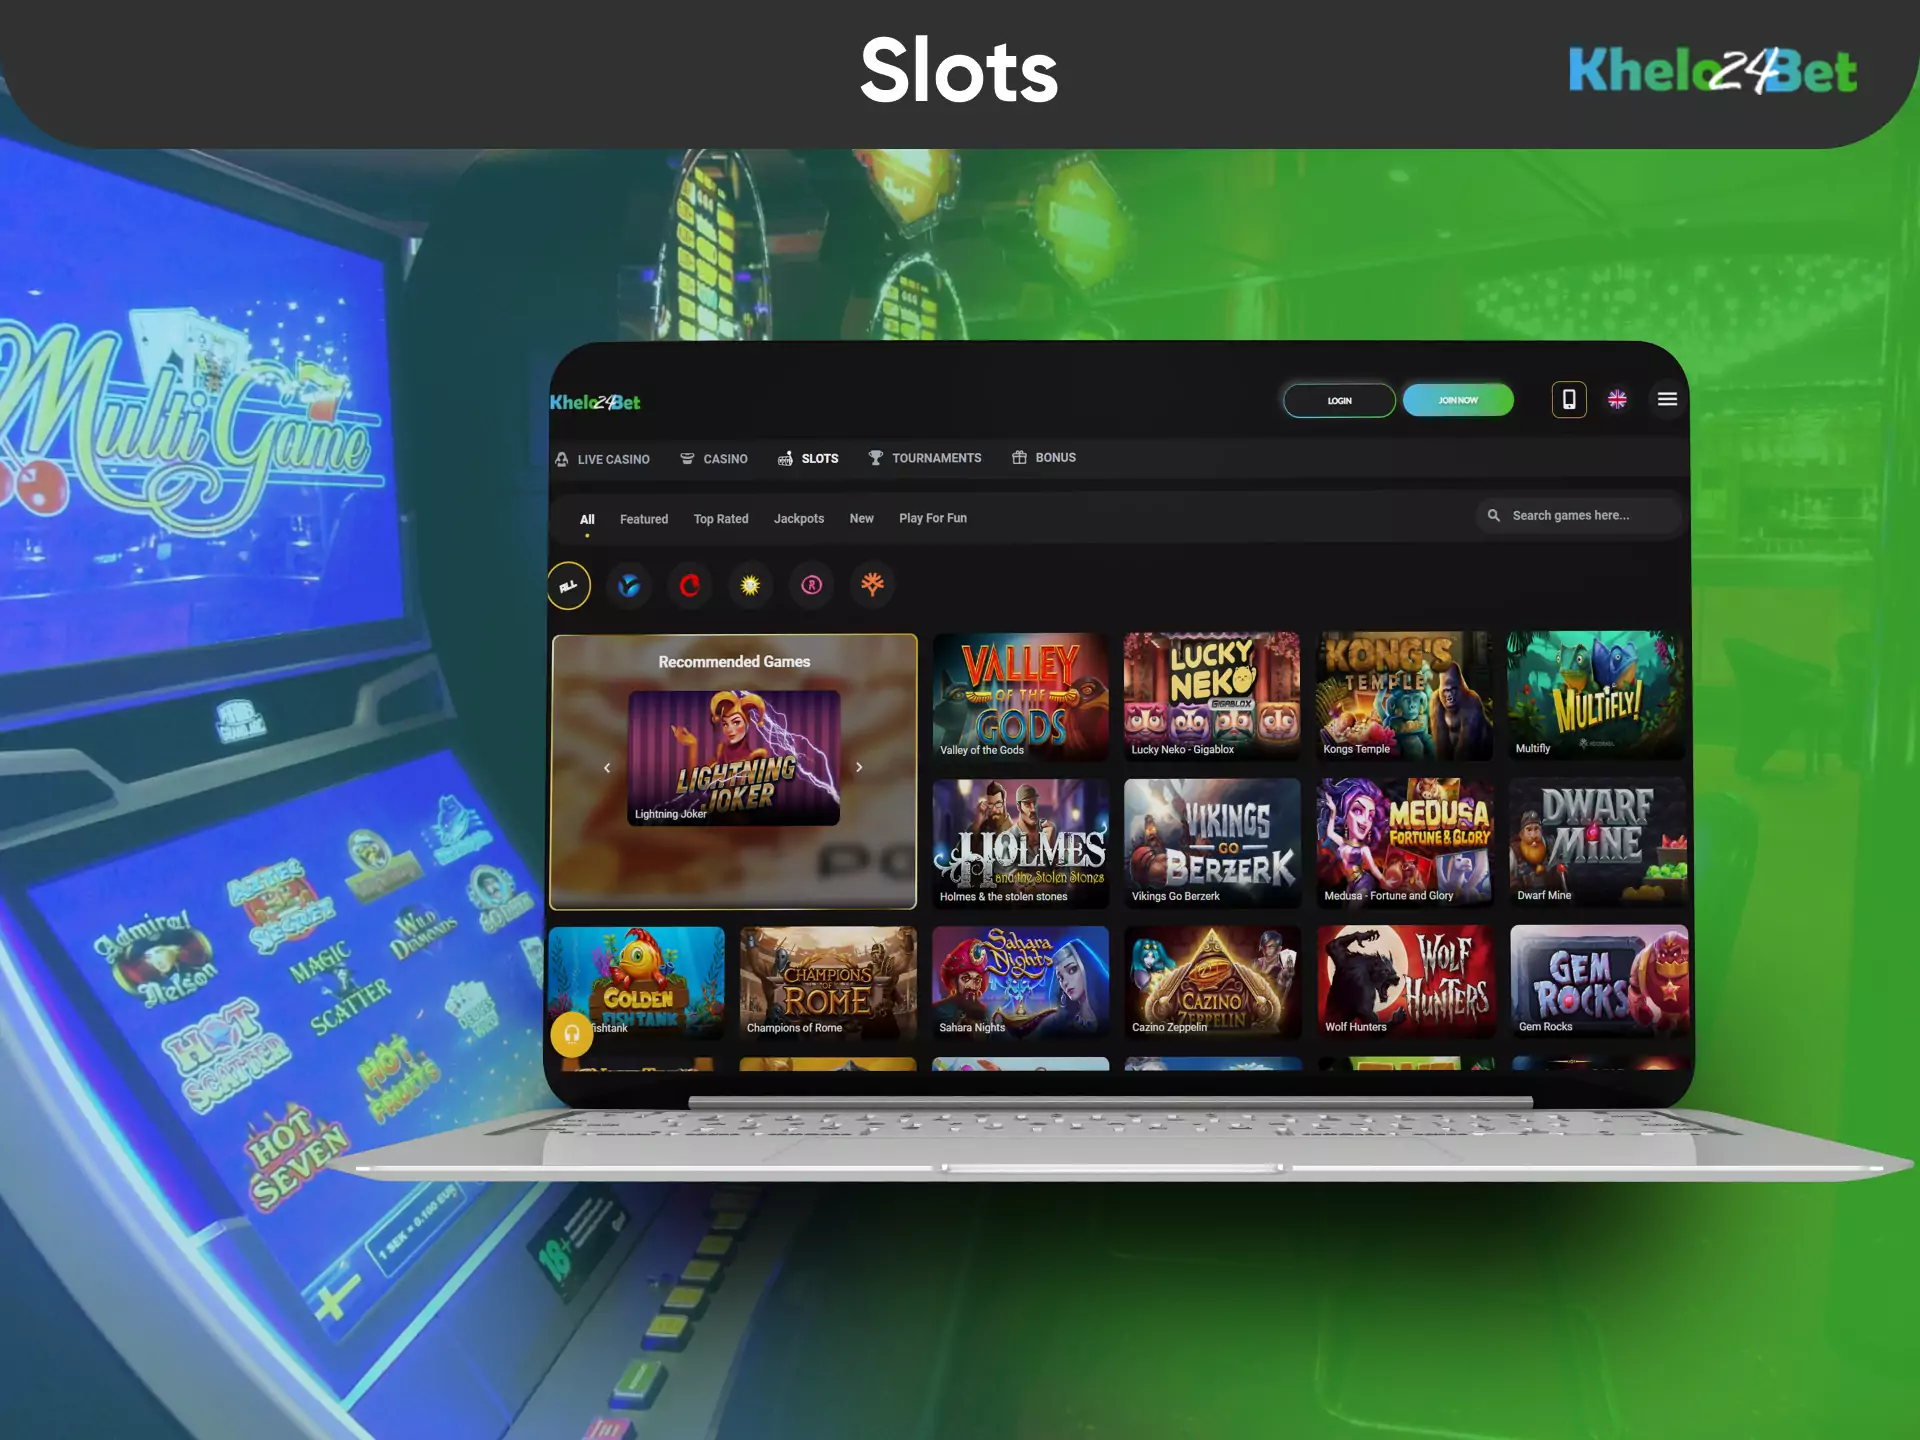 In the Khelo24bet Online Casino, you find a big number of colourful slots.